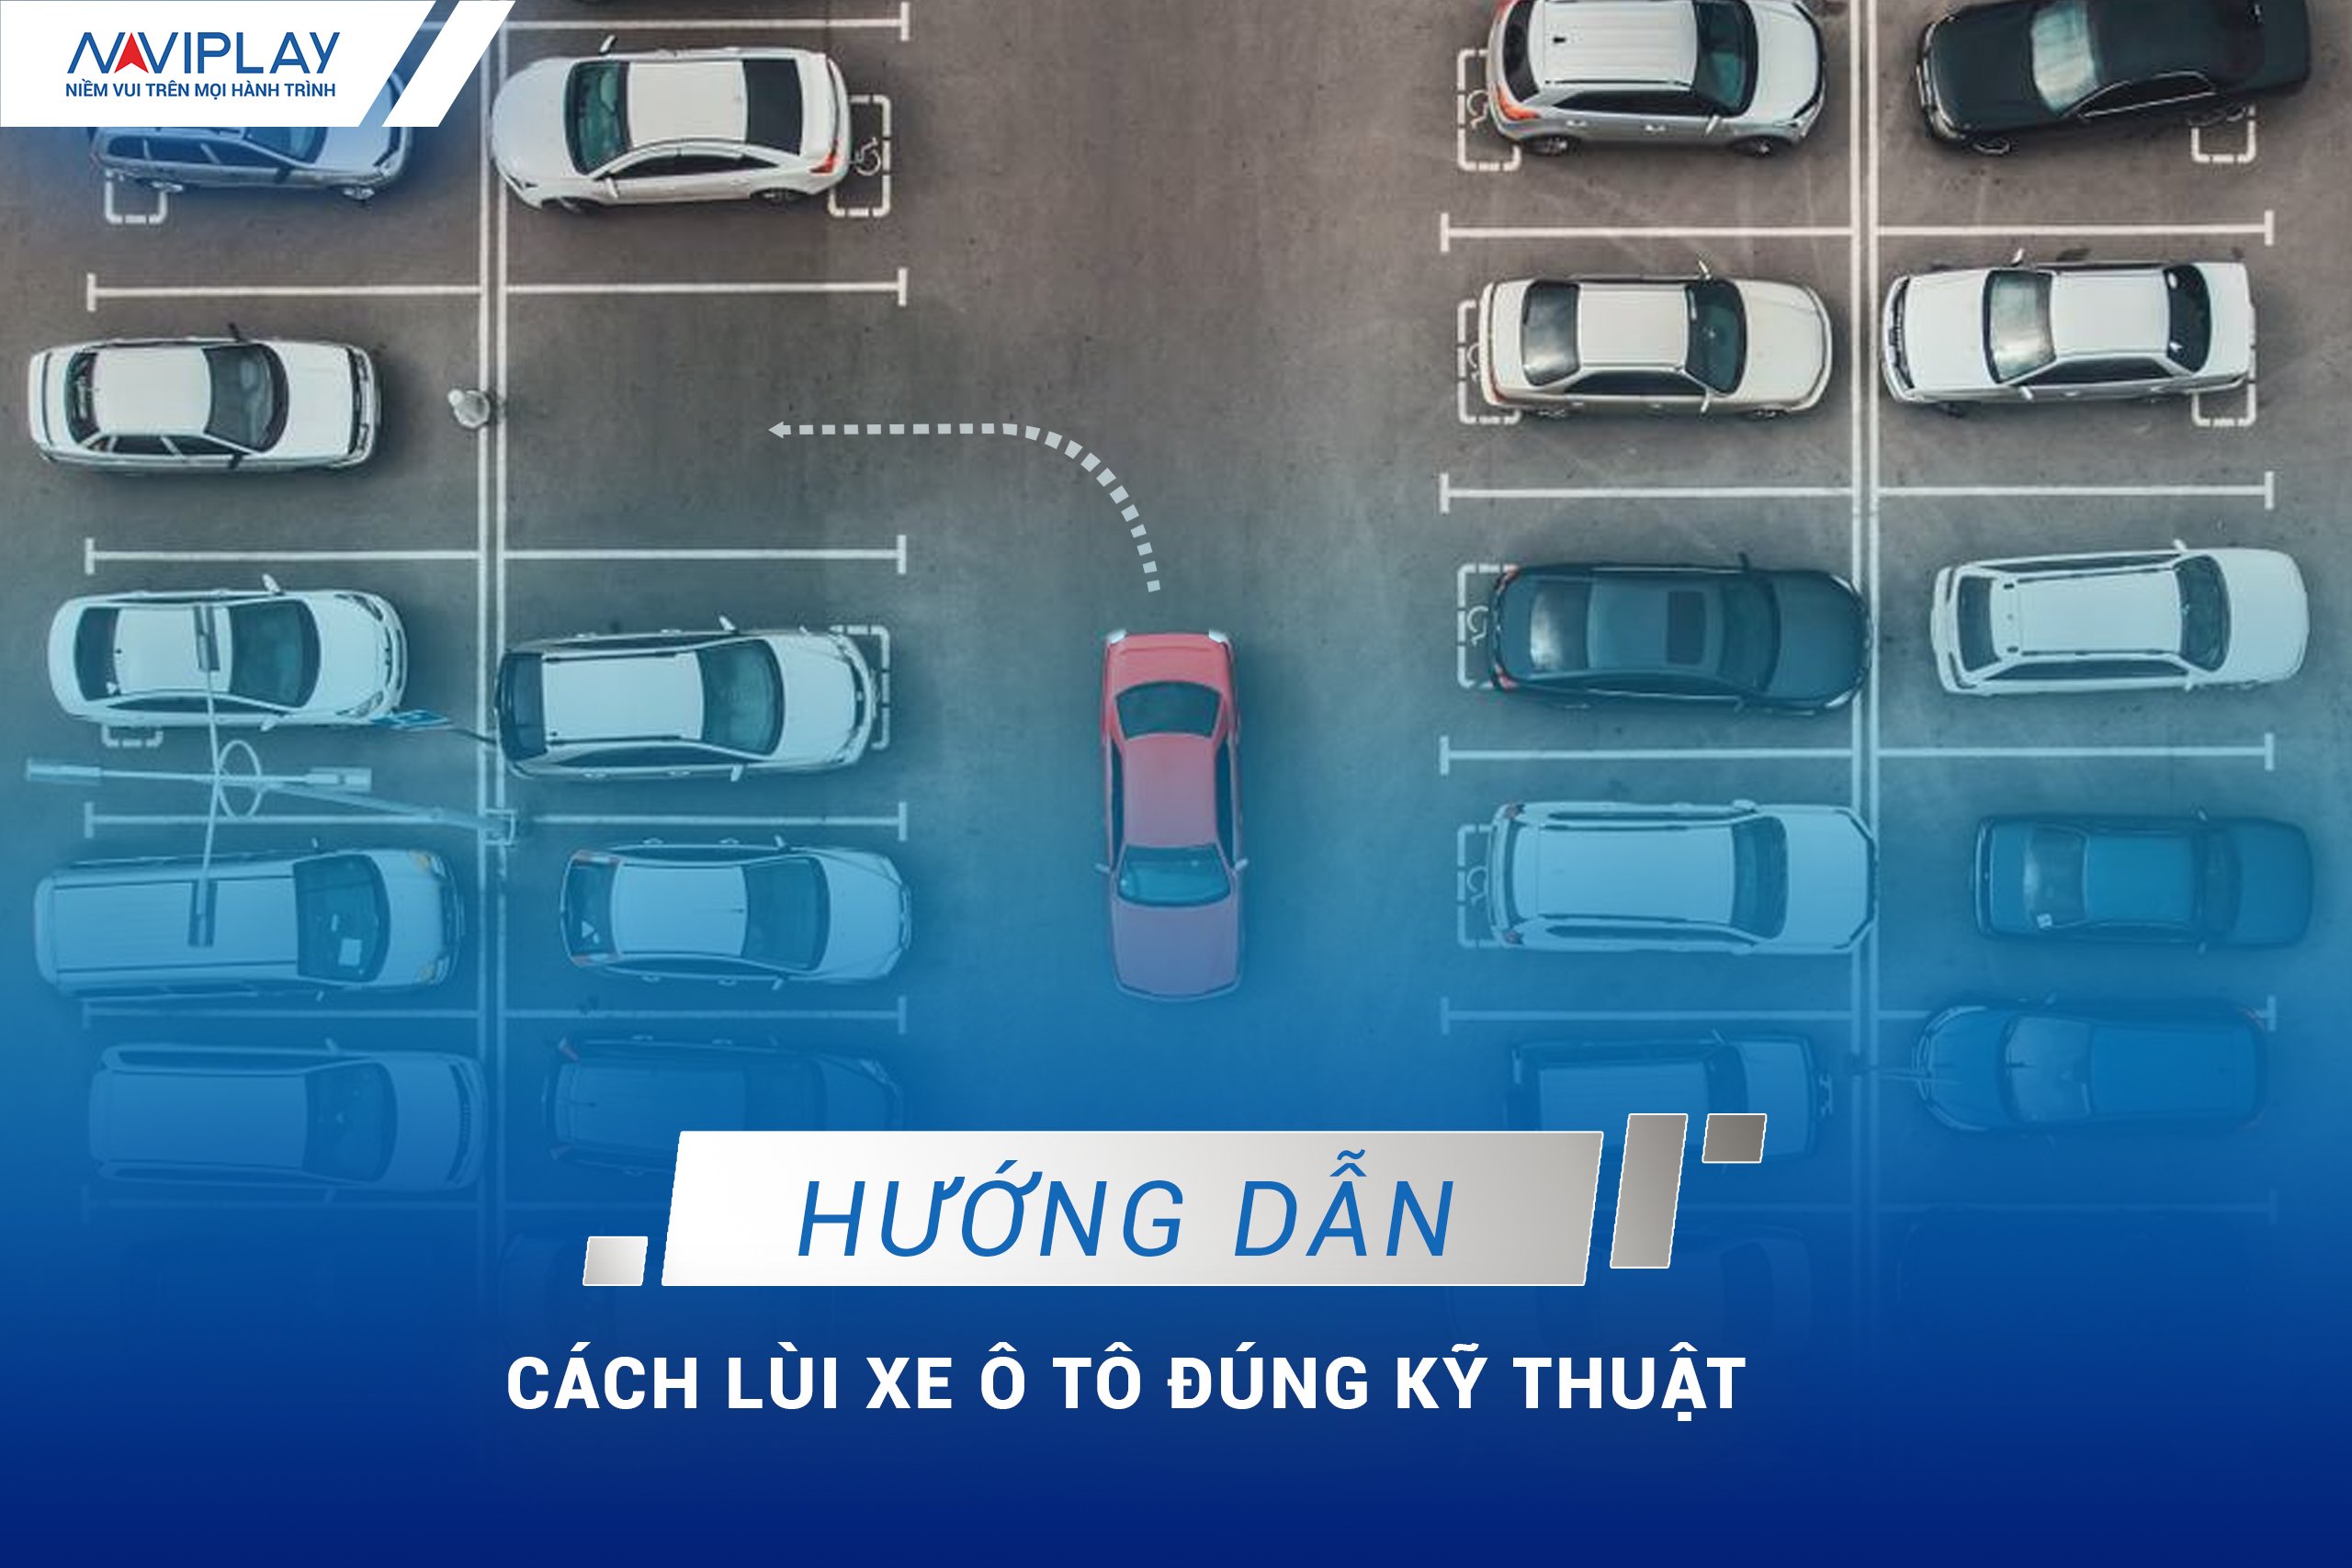 cach-lui-xe-o-to-dung-ky-thuat